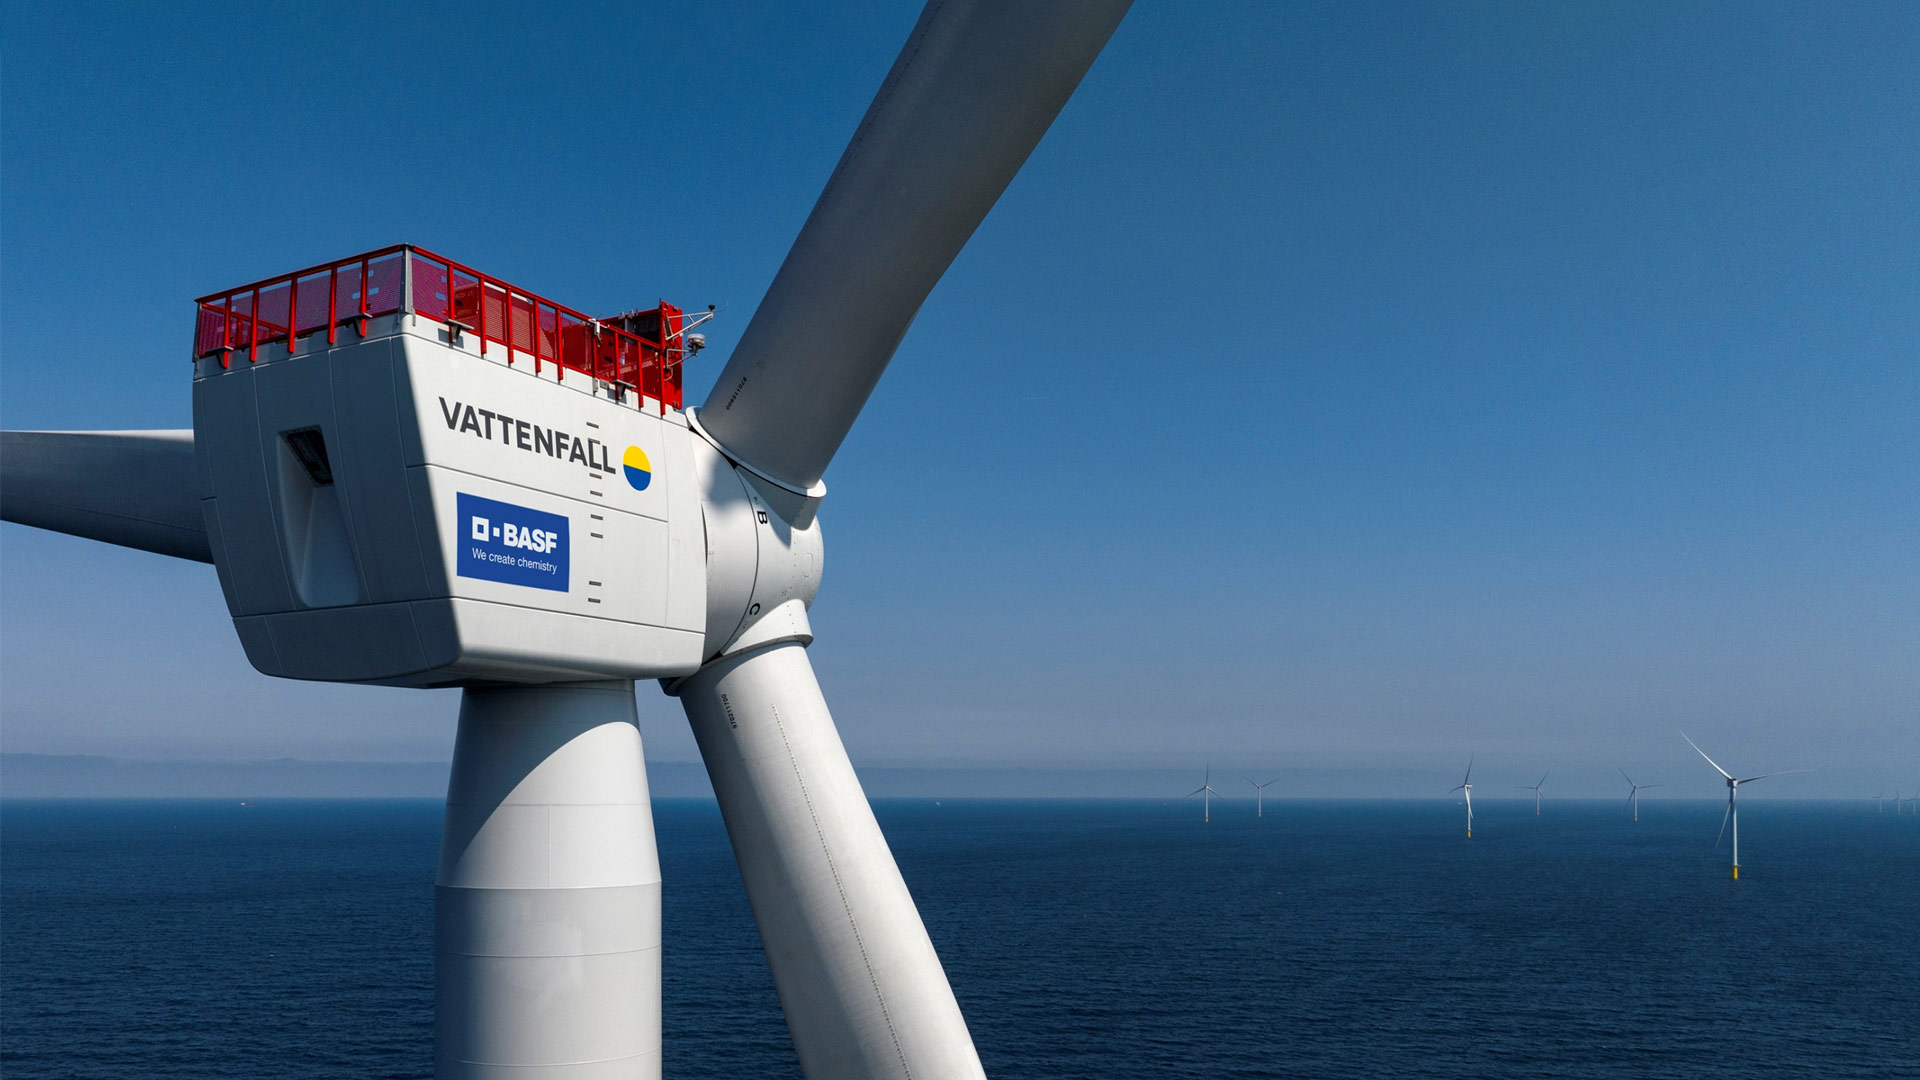 Offshore wind farm with BASF and Vattenfall logos